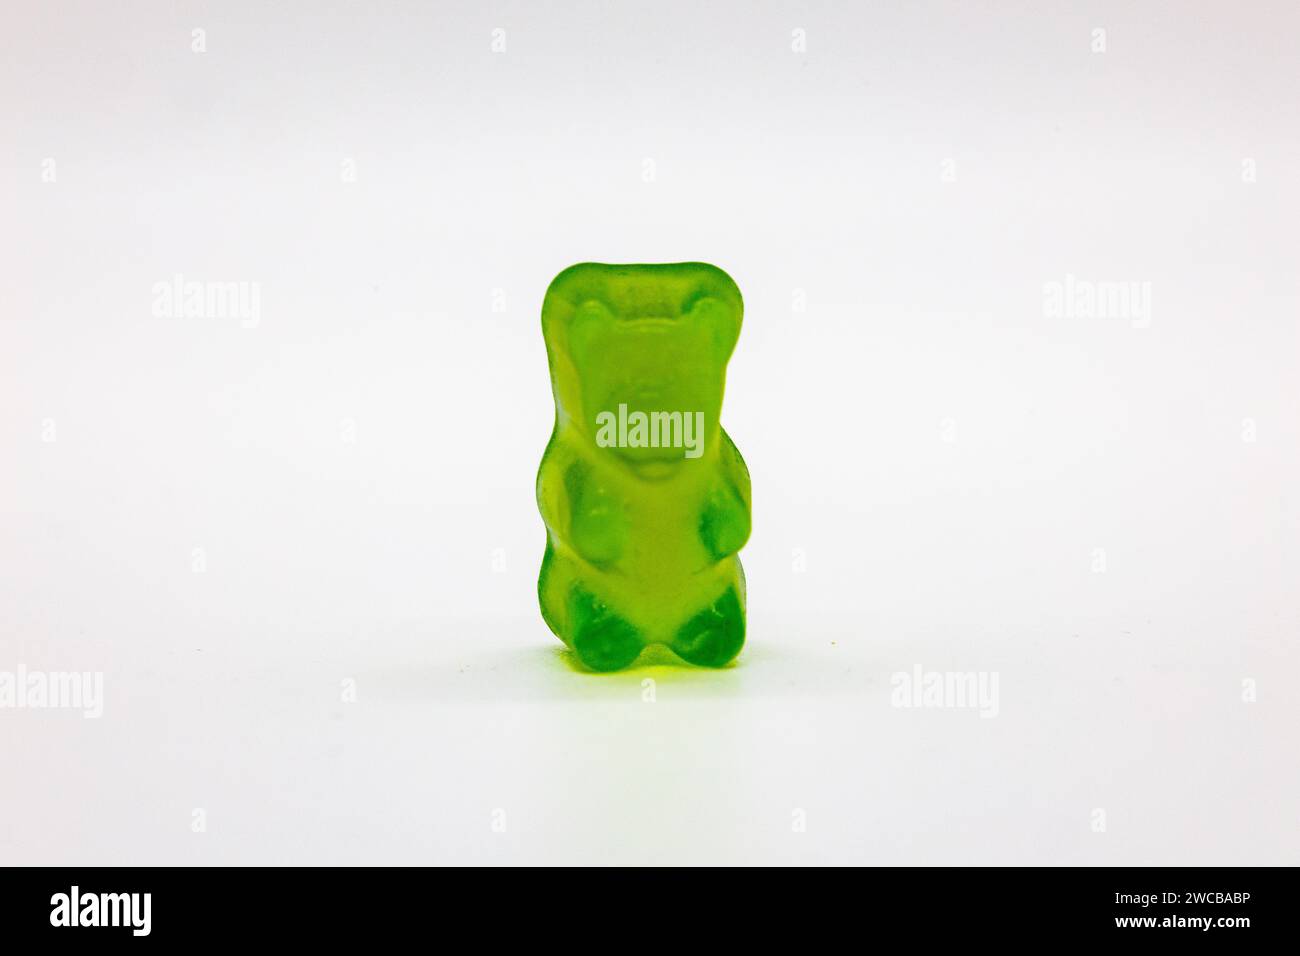 A colorful gummy bear is placed on a vibrant apple green tablecloth, creating a playful and eye-catching composition Stock Photo